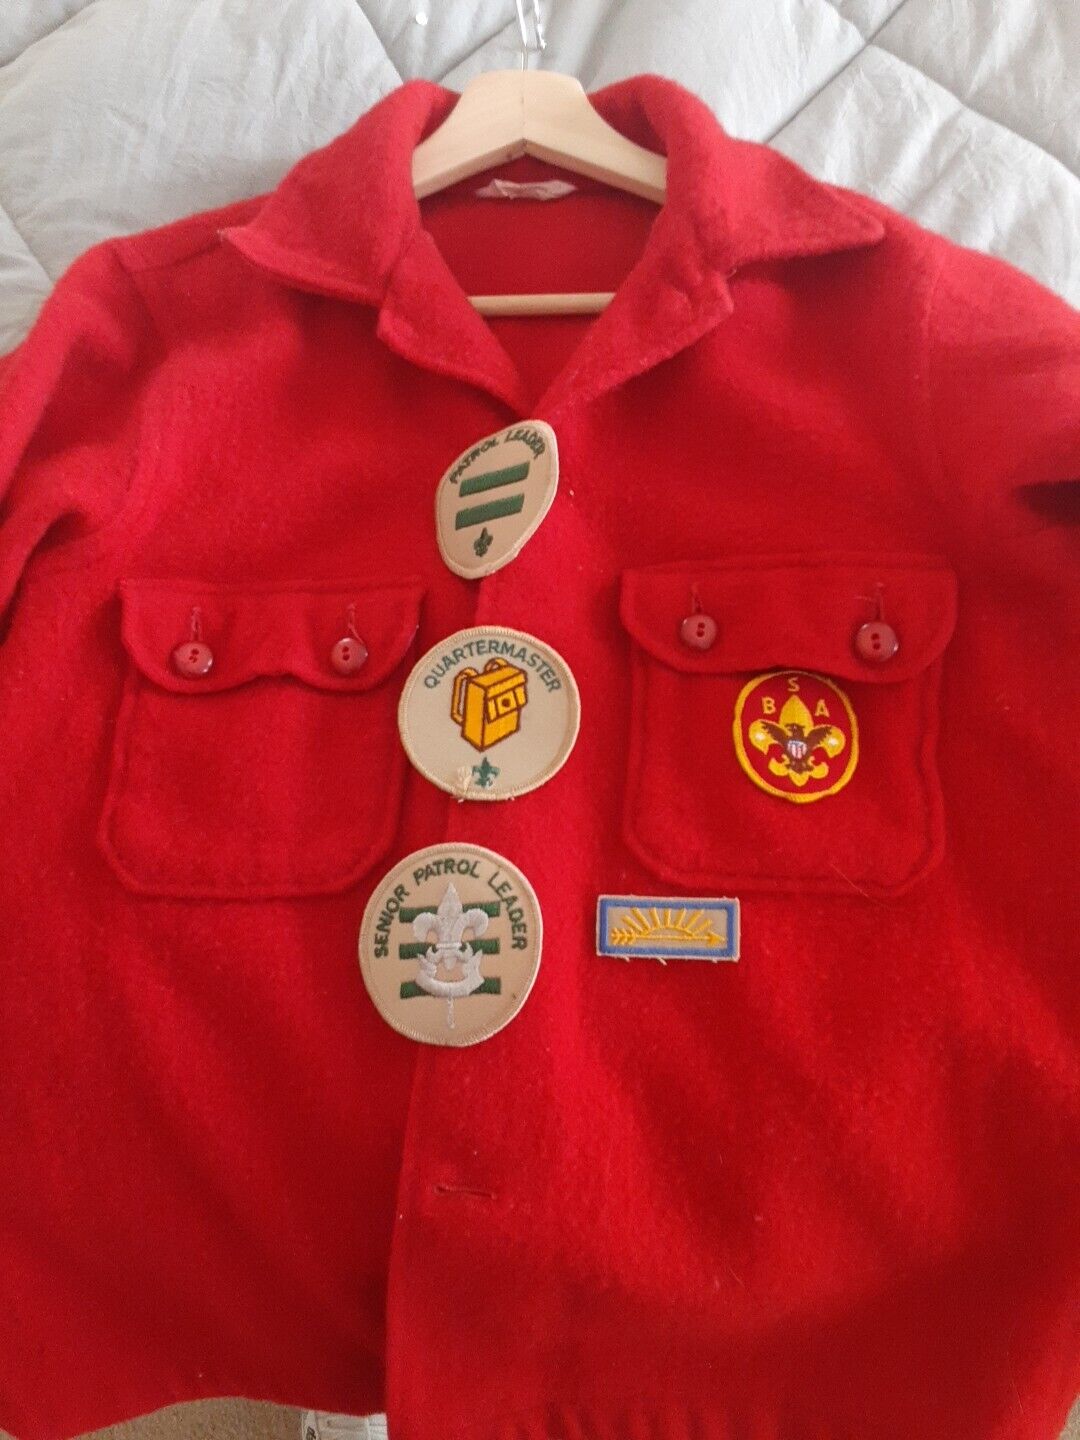 Vintage Official Boy Scouts of America Red Wool Jacket 553  Size 44 60s?